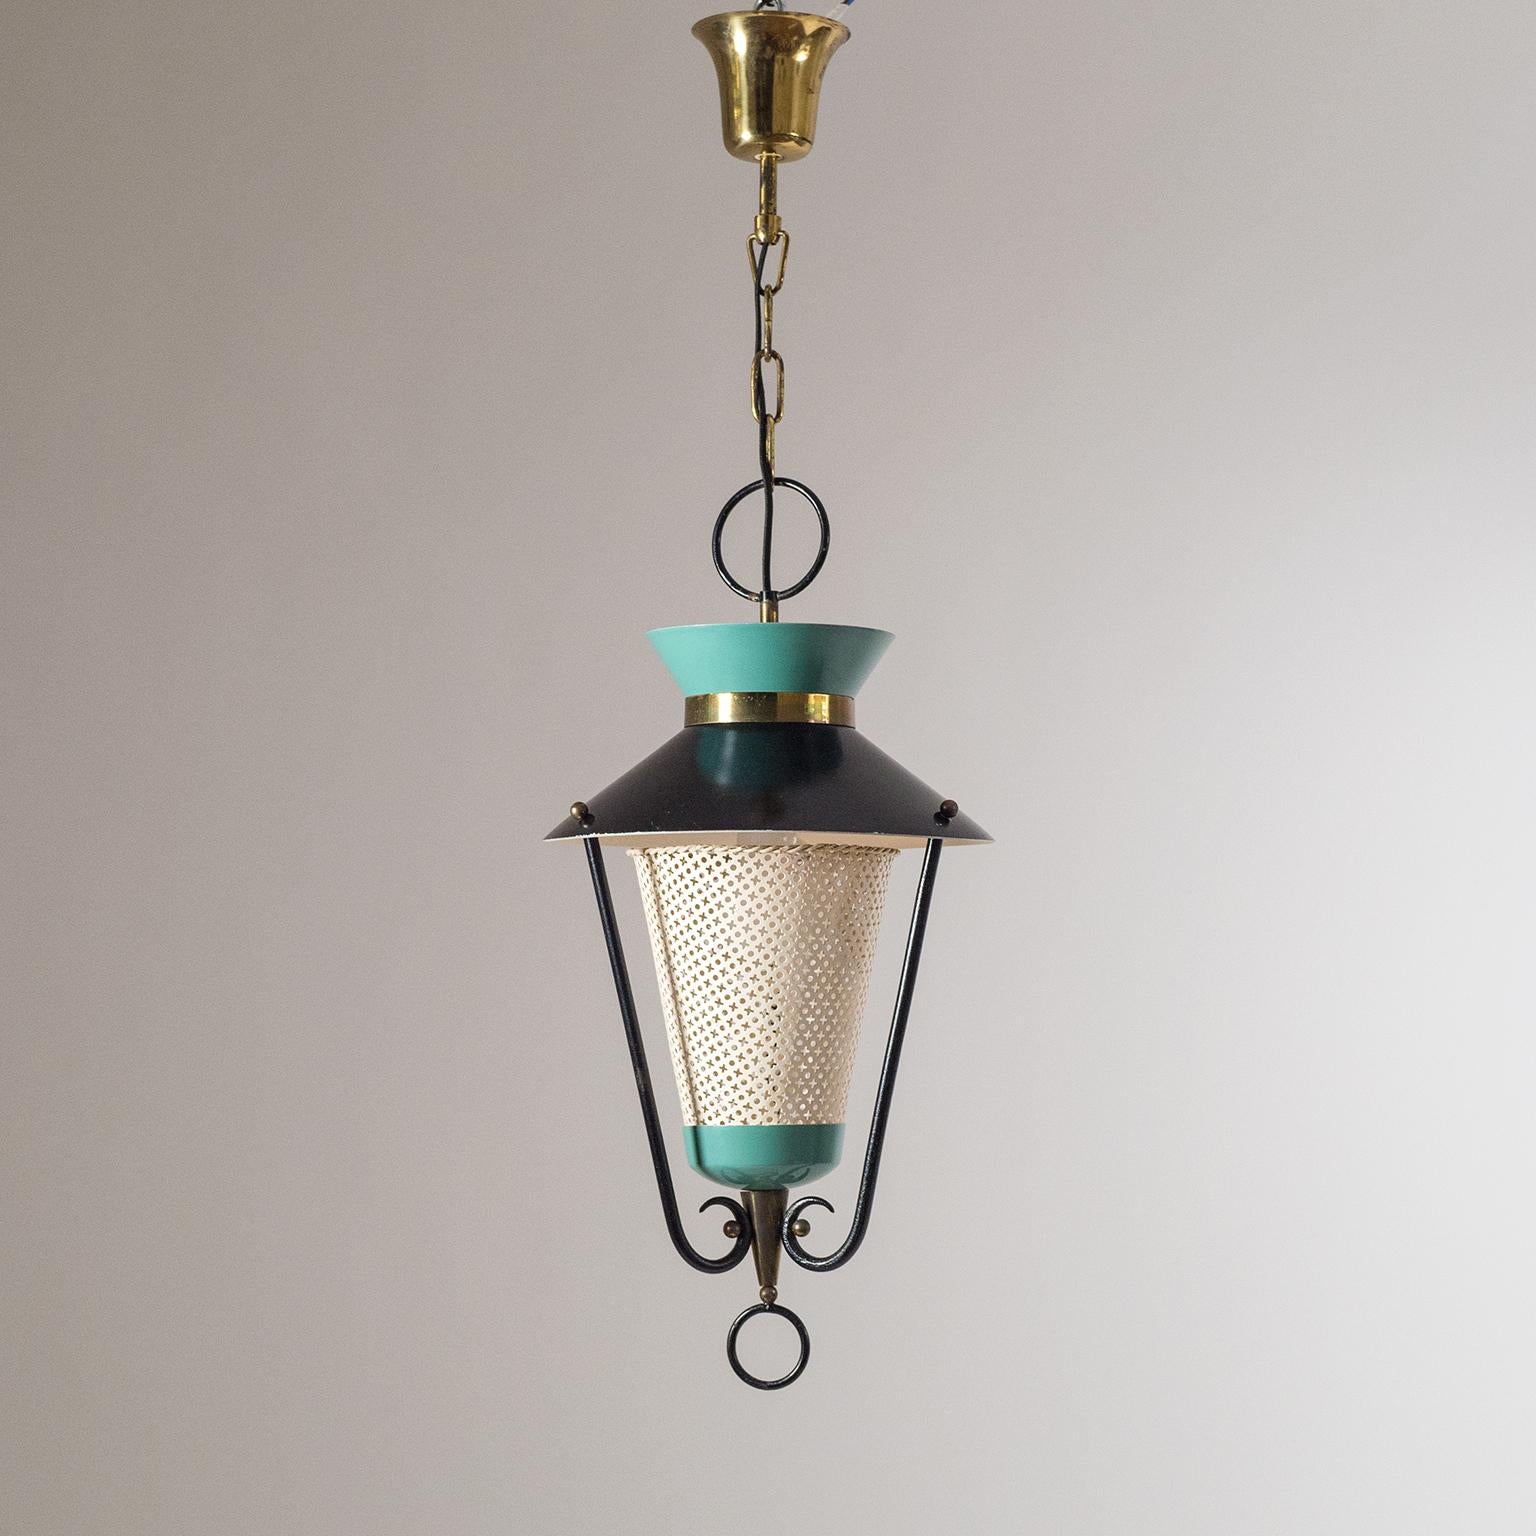 Classic French midcentury lantern from the 1950s in brass and lacquered steel. Lovely color scheme in black, dark mint and off-white with brass details. Fine original condition with some light wear to the original lacquer. One brass and ceramic E27